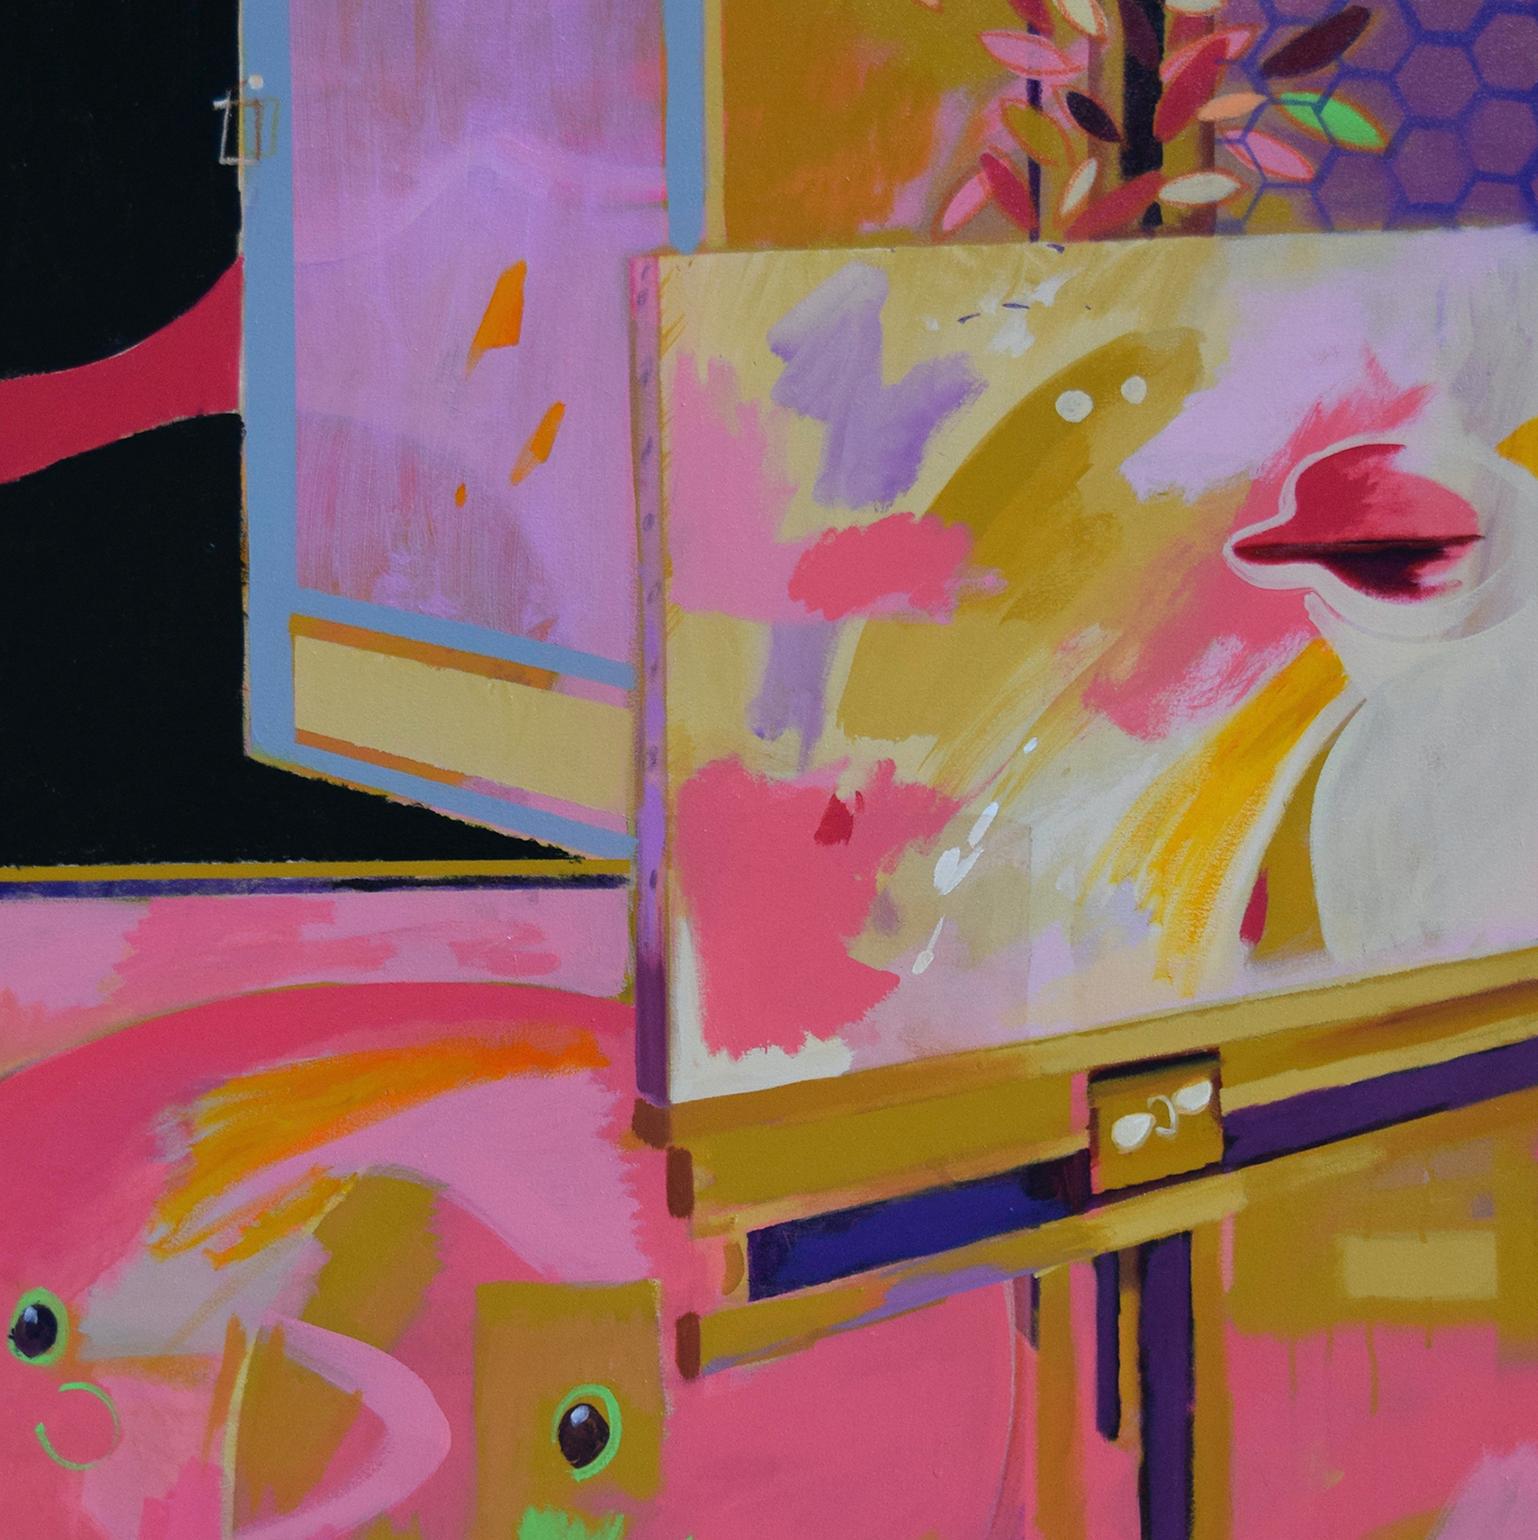 It is a still life 3 - Still life abstract, painting in foreground, pink, purple - Painting by Paul Thomas